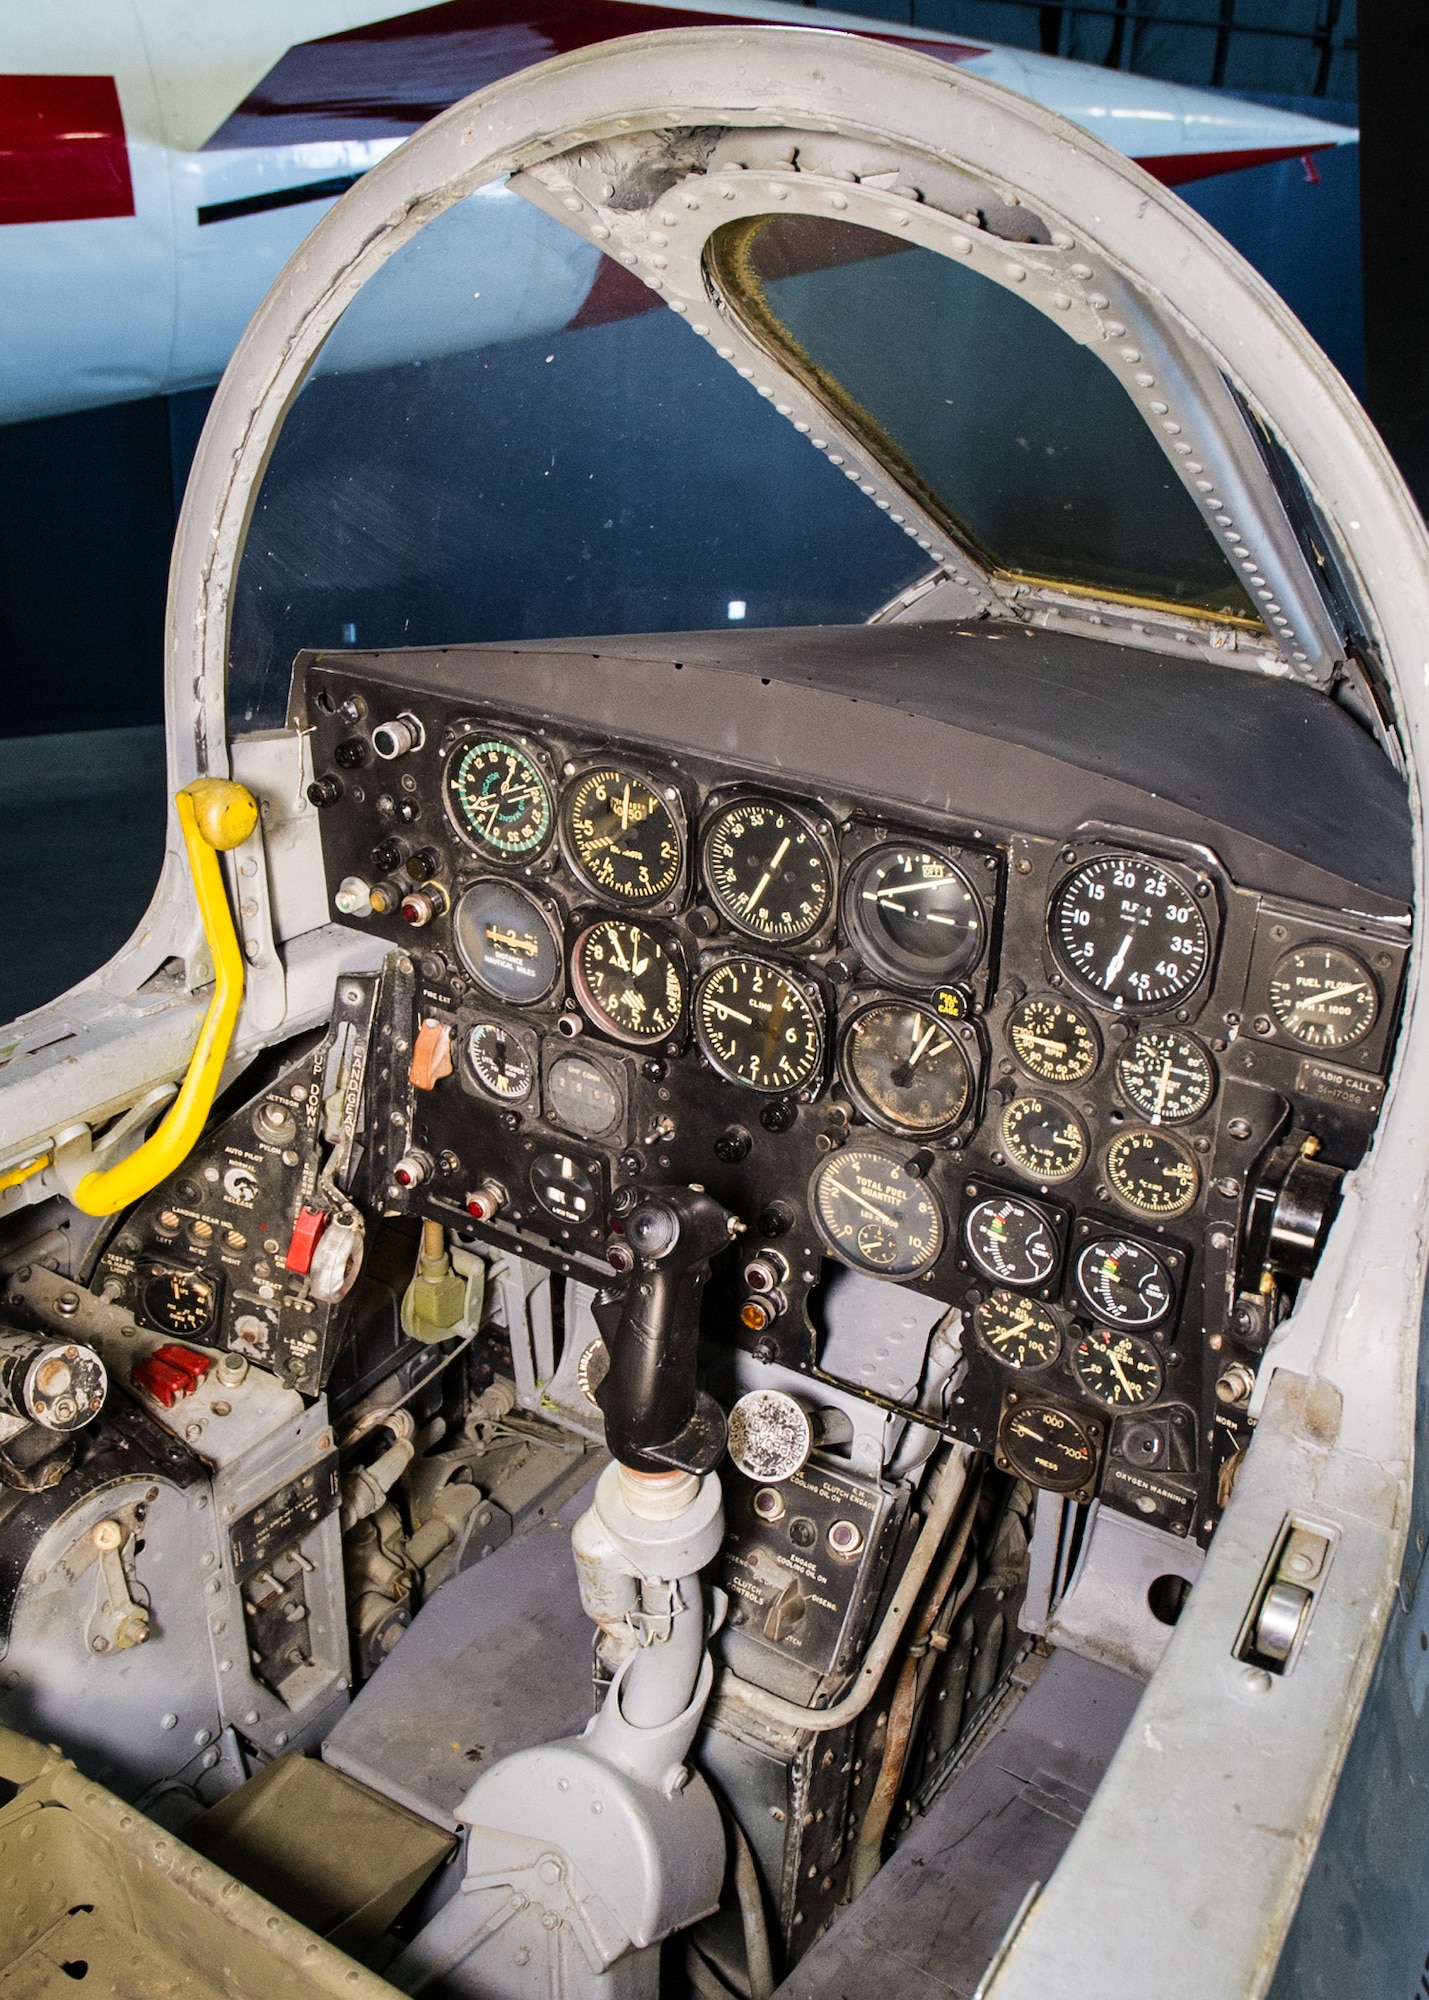 DAYTON, Ohio -- Republic XF-84H cockpit view in the Research & Development Gallery at the National Museum of the United States Air Force. (U.S. Air Force photo by Ken LaRock)
